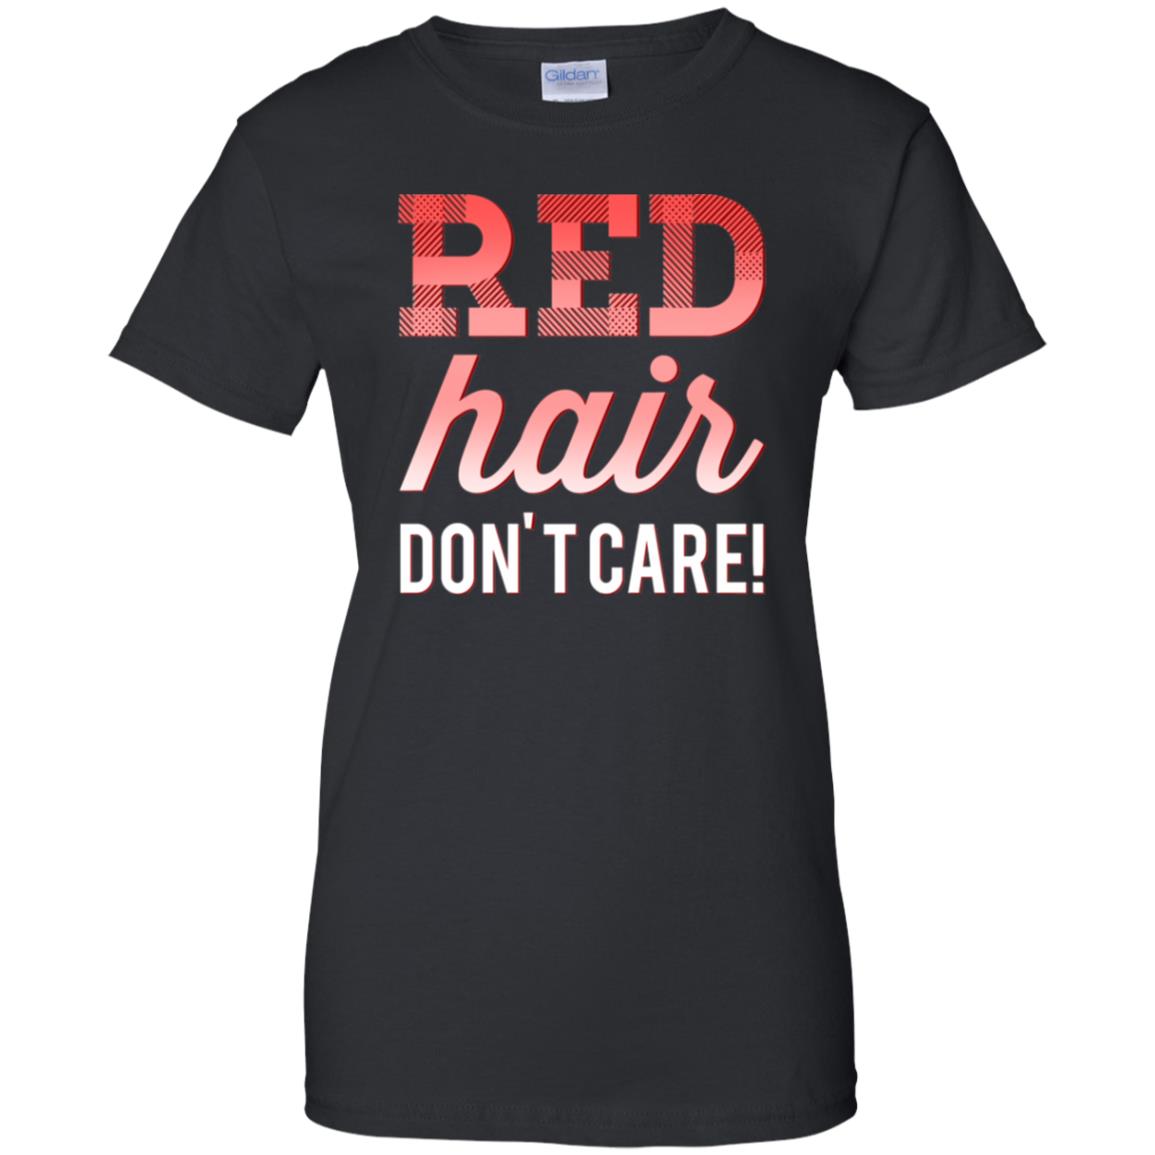 Hair dont care red 